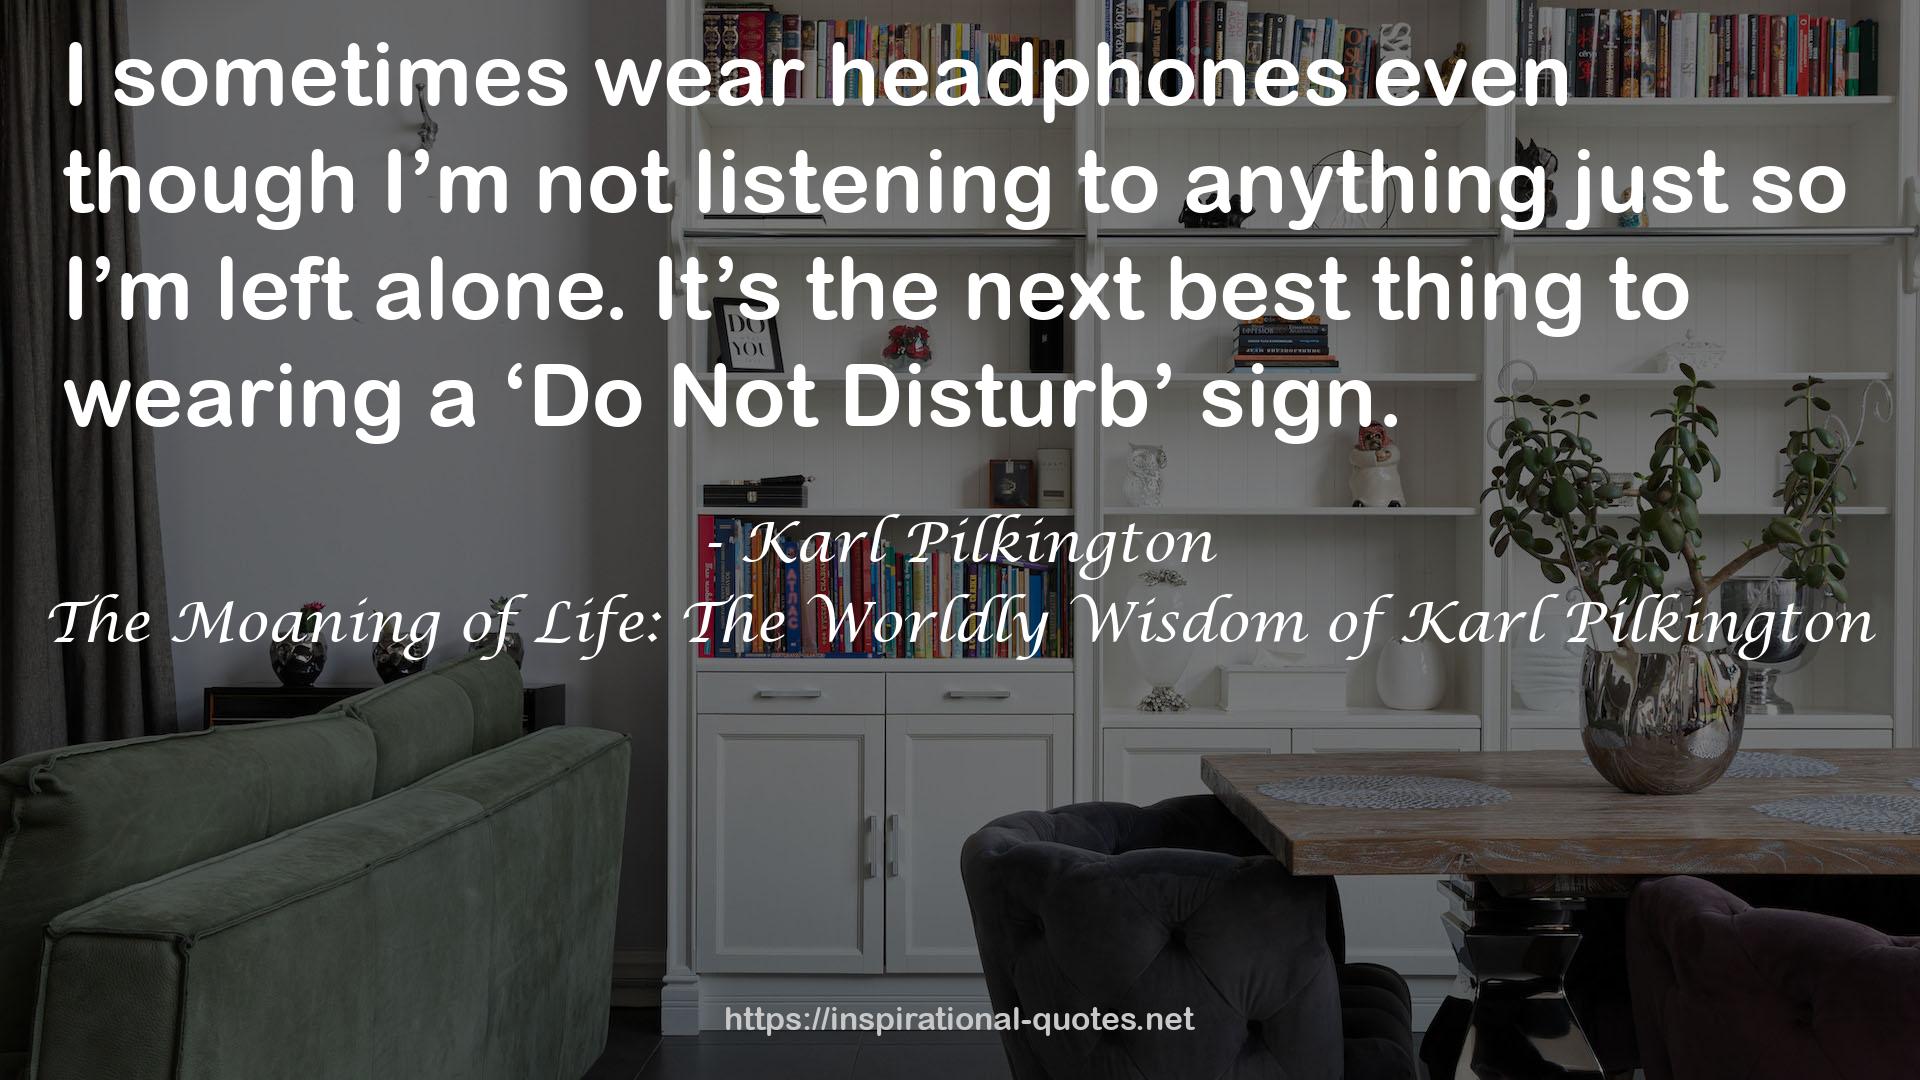 The Moaning of Life: The Worldly Wisdom of Karl Pilkington QUOTES